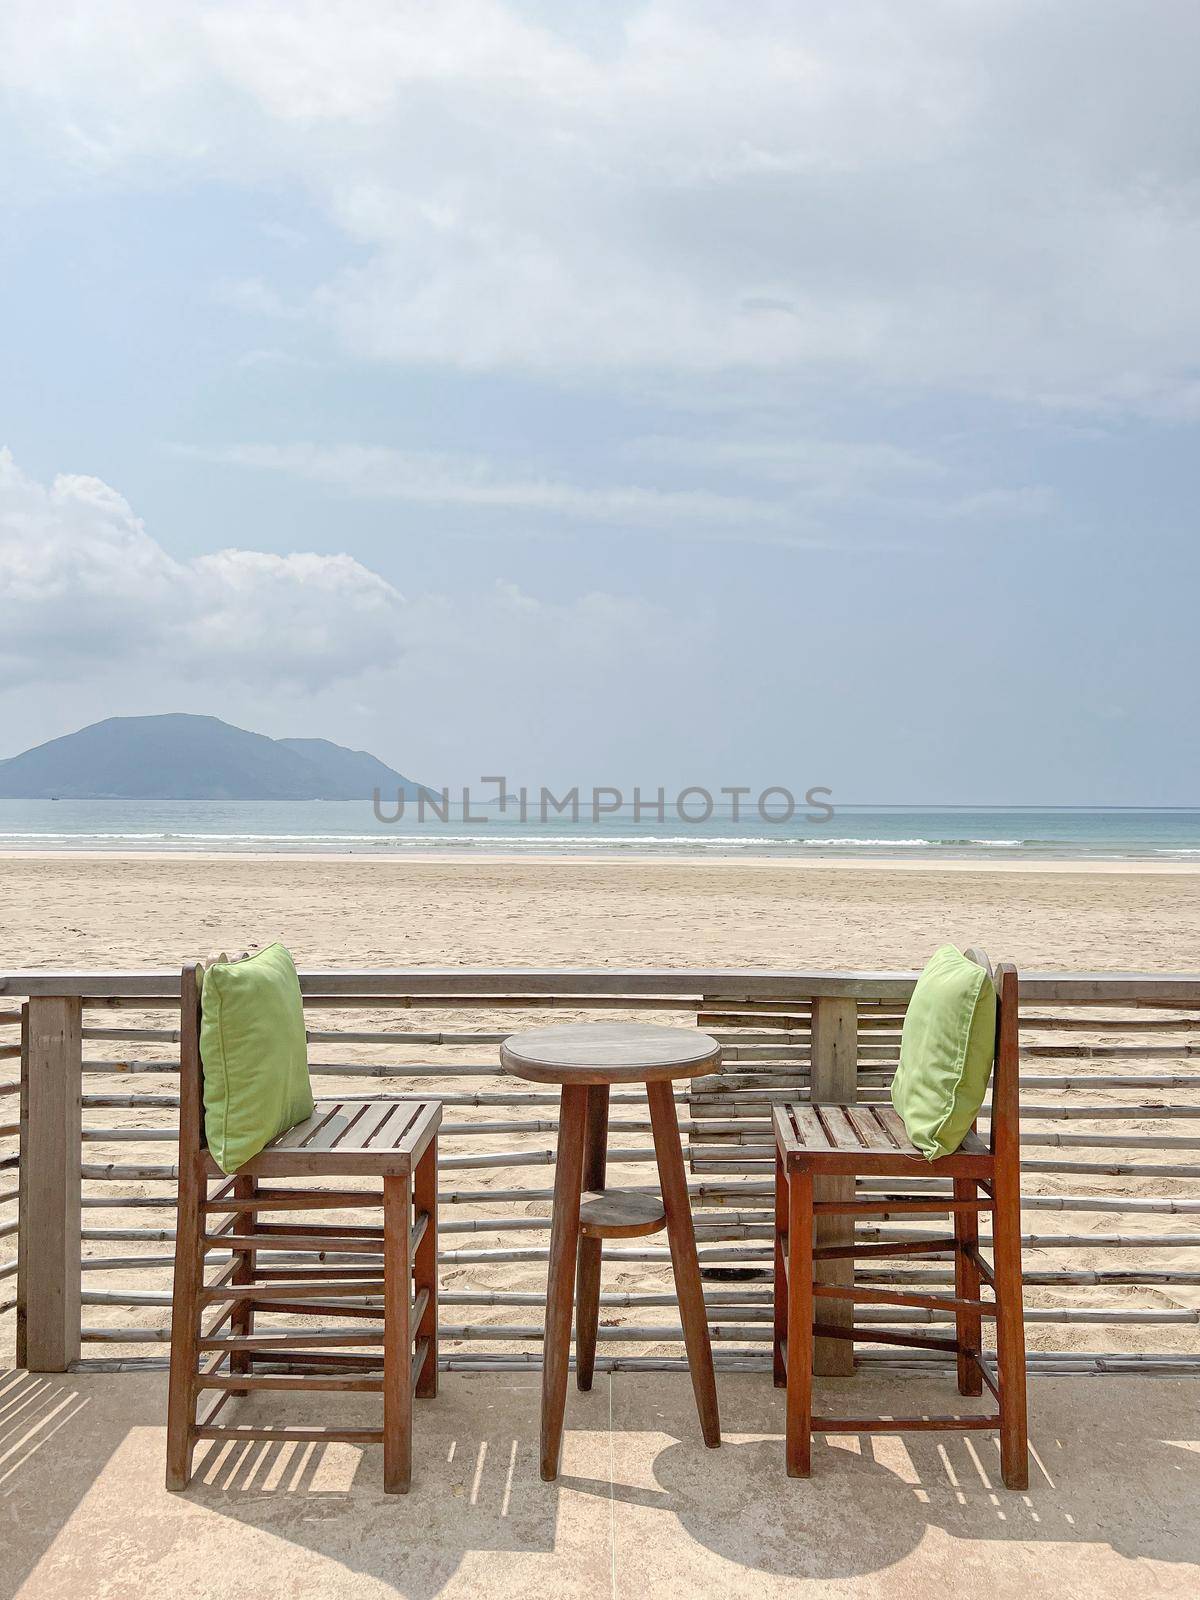 Wooden chairs of restaurant overlooking near the sea beach.